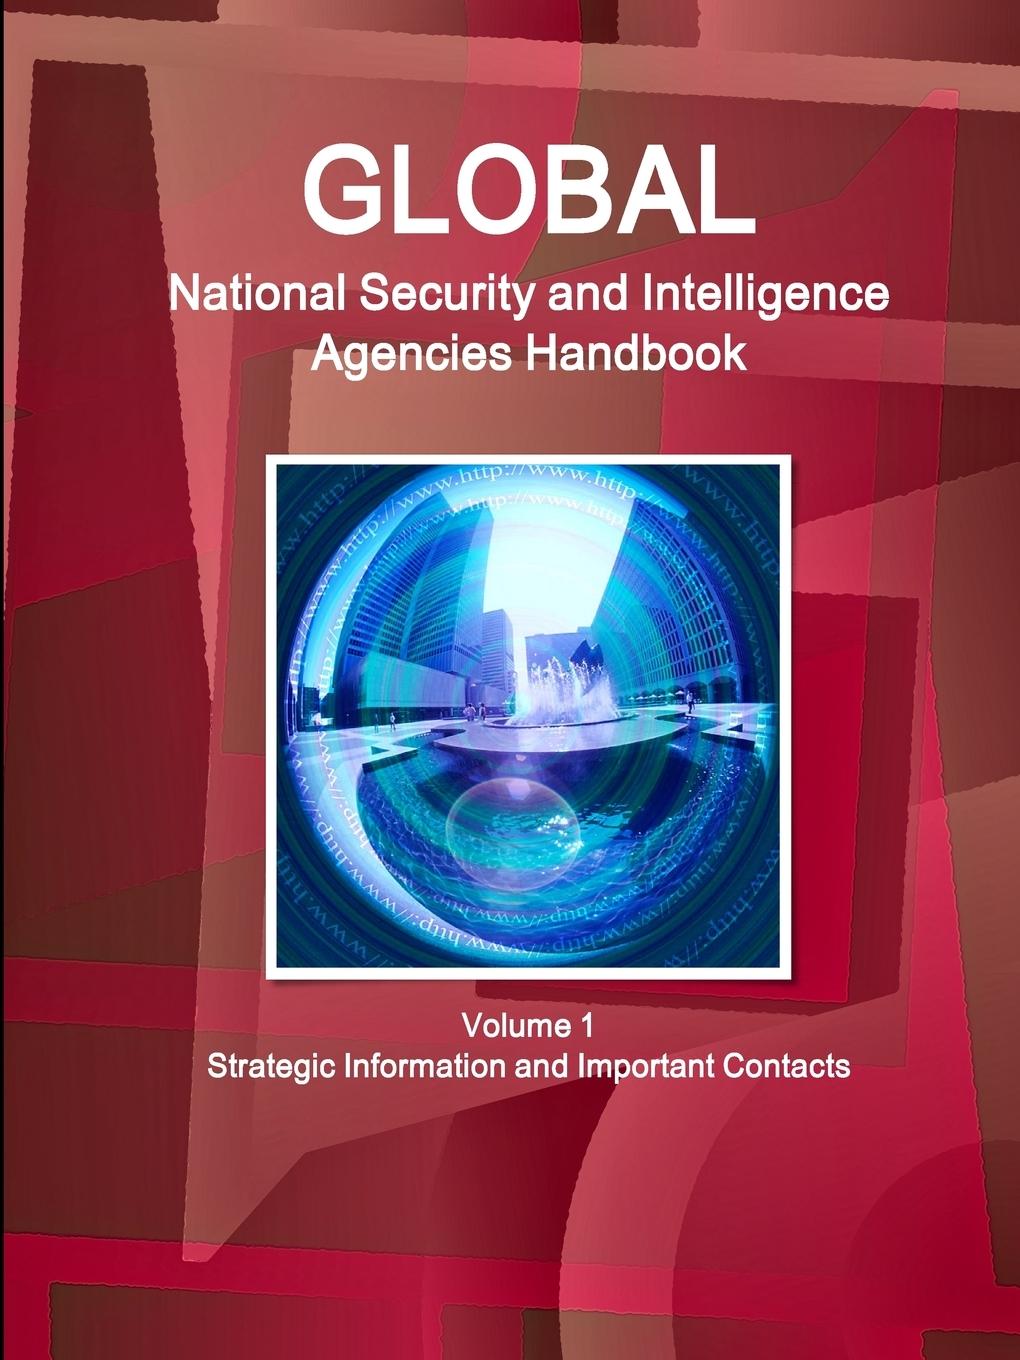 Global National Security and Intelligence Agencies Handbook Volume 1 Strategic Information and Important Contacts - Www. Ibpus. Com